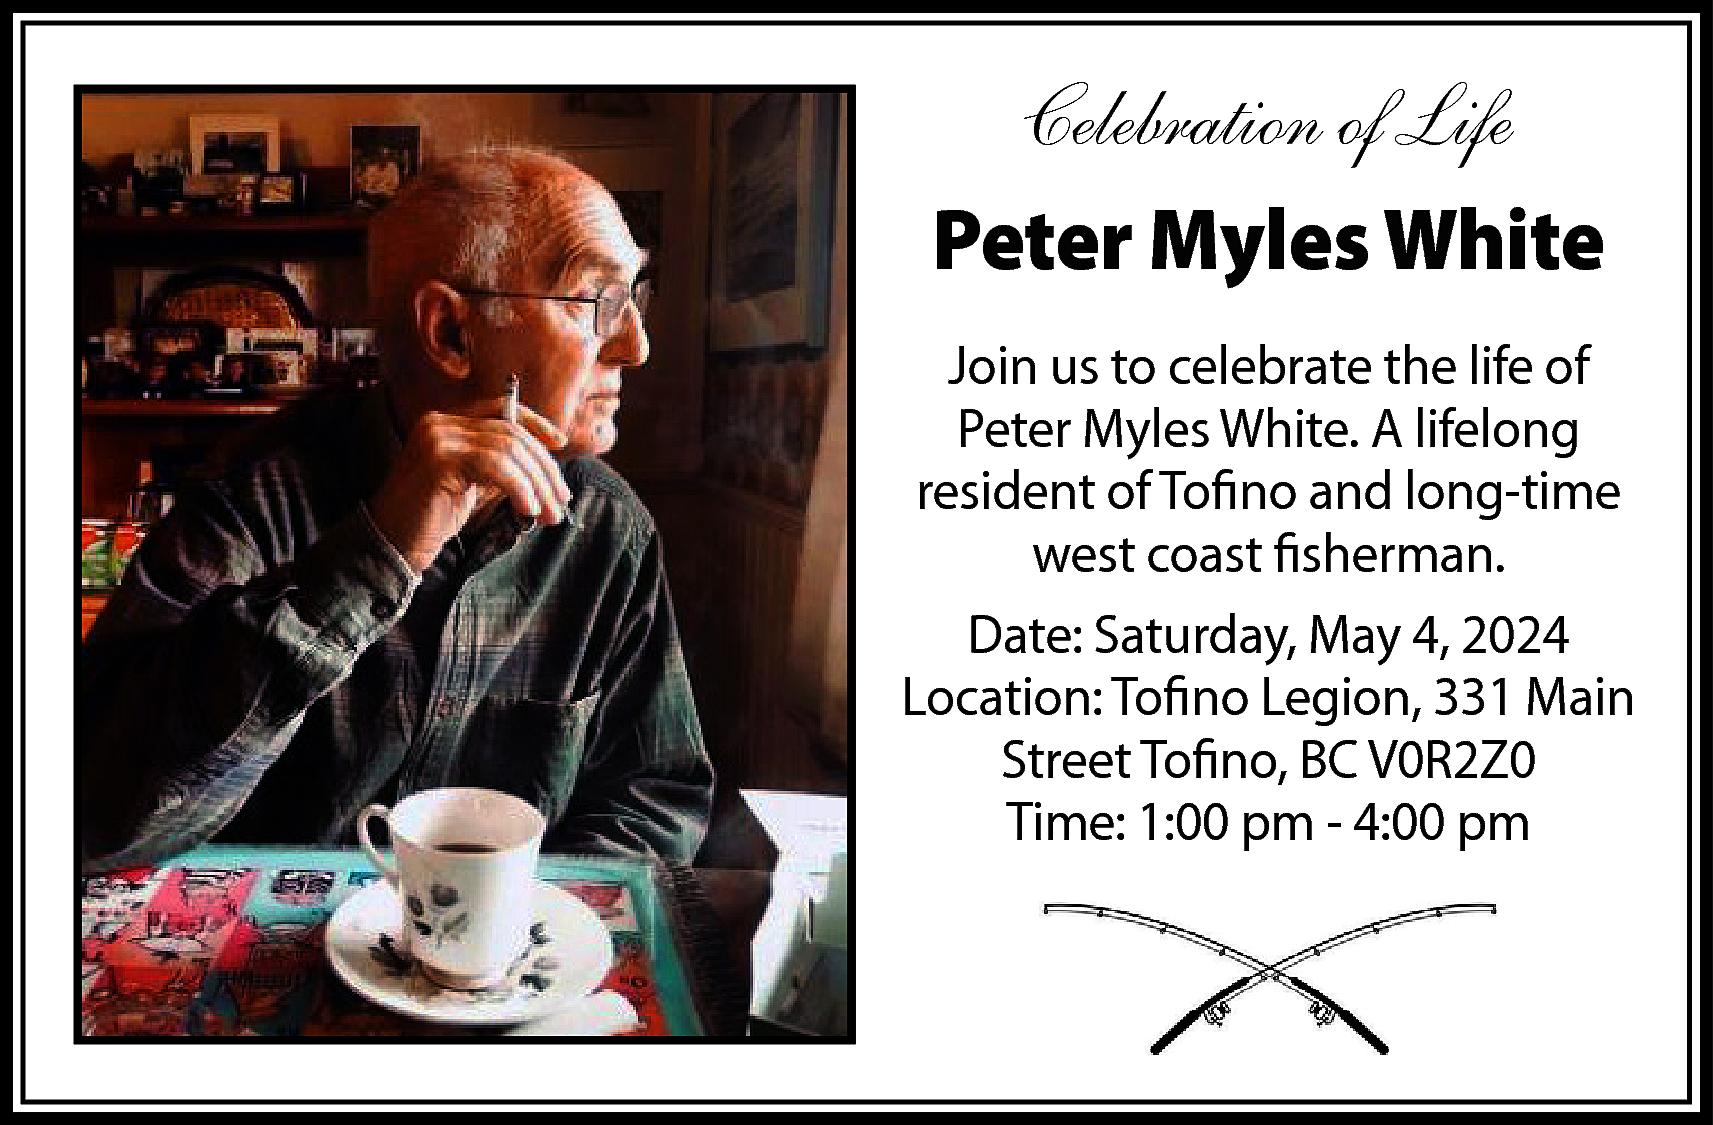 Celebration of Life <br>Peter Myles  Celebration of Life  Peter Myles White  Join us to celebrate the life of  Peter Myles White. A lifelong  resident of Tofino and long-time  west coast fisherman.  Date: Saturday, May 4, 2024  Location: Tofino Legion, 331 Main  Street Tofino, BC V0R2Z0  Time: 1:00 pm - 4:00 pm    